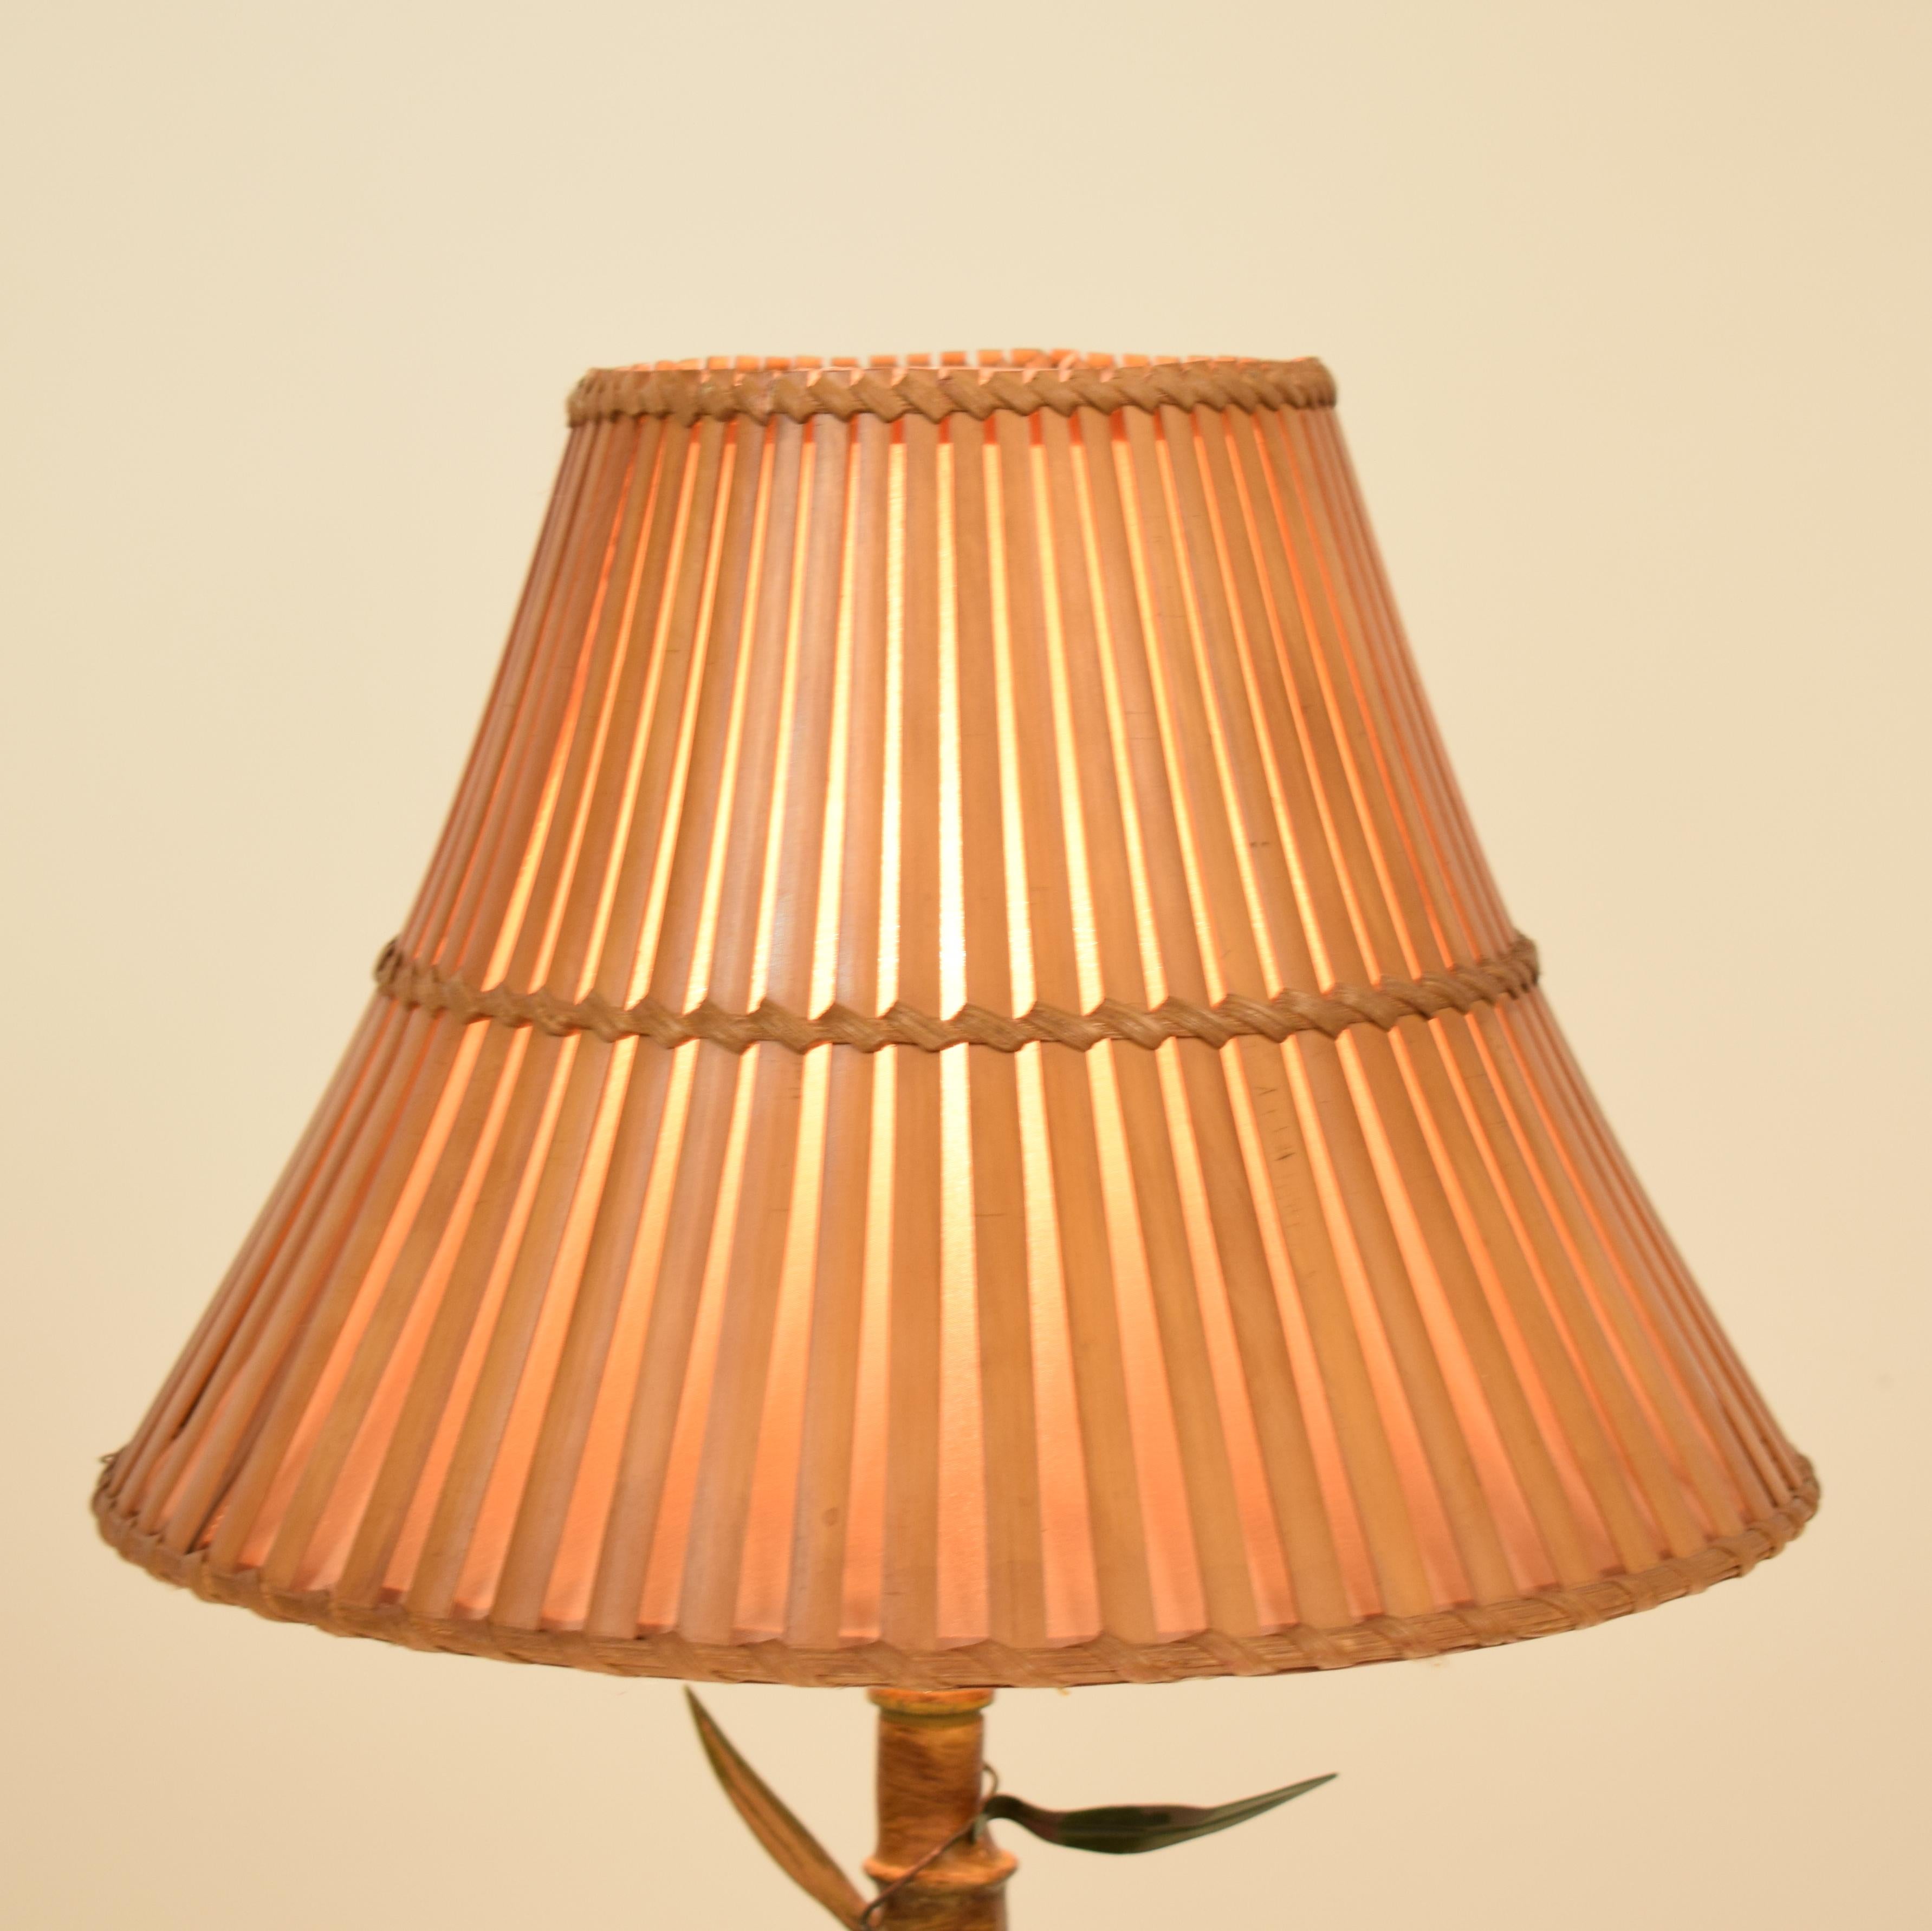 Late 20th Century Midcentury Italian Faux Bamboo Table Lamp with Parrots and Bamboo Lamp Shade